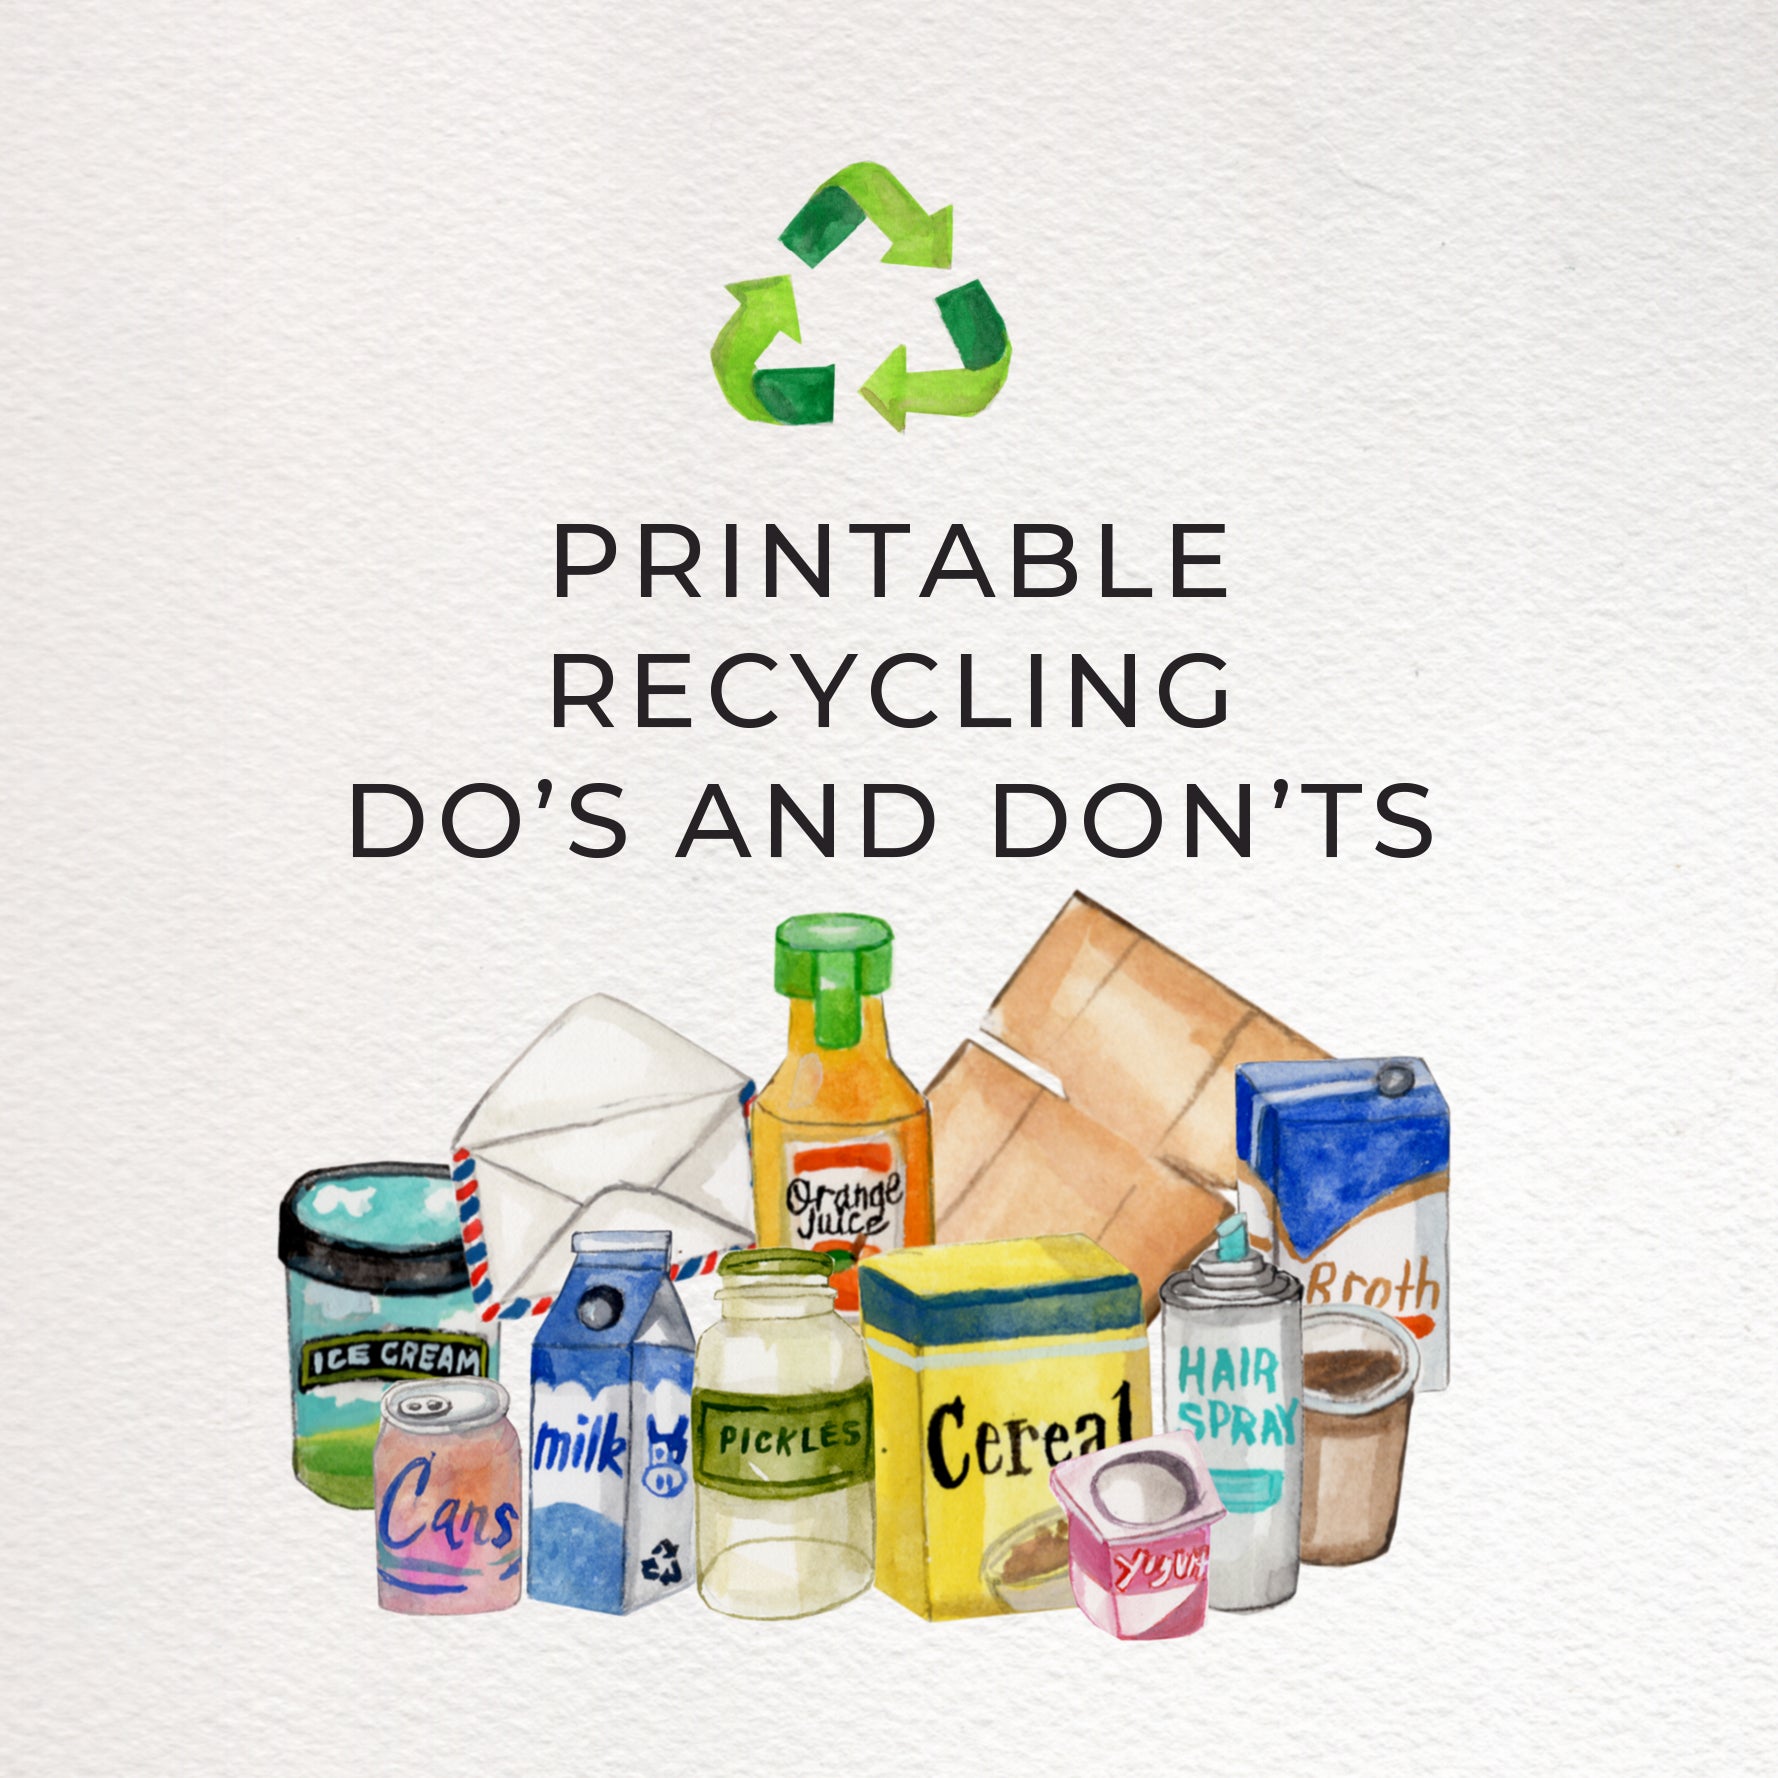 Printable Recycling Do's and Don'ts